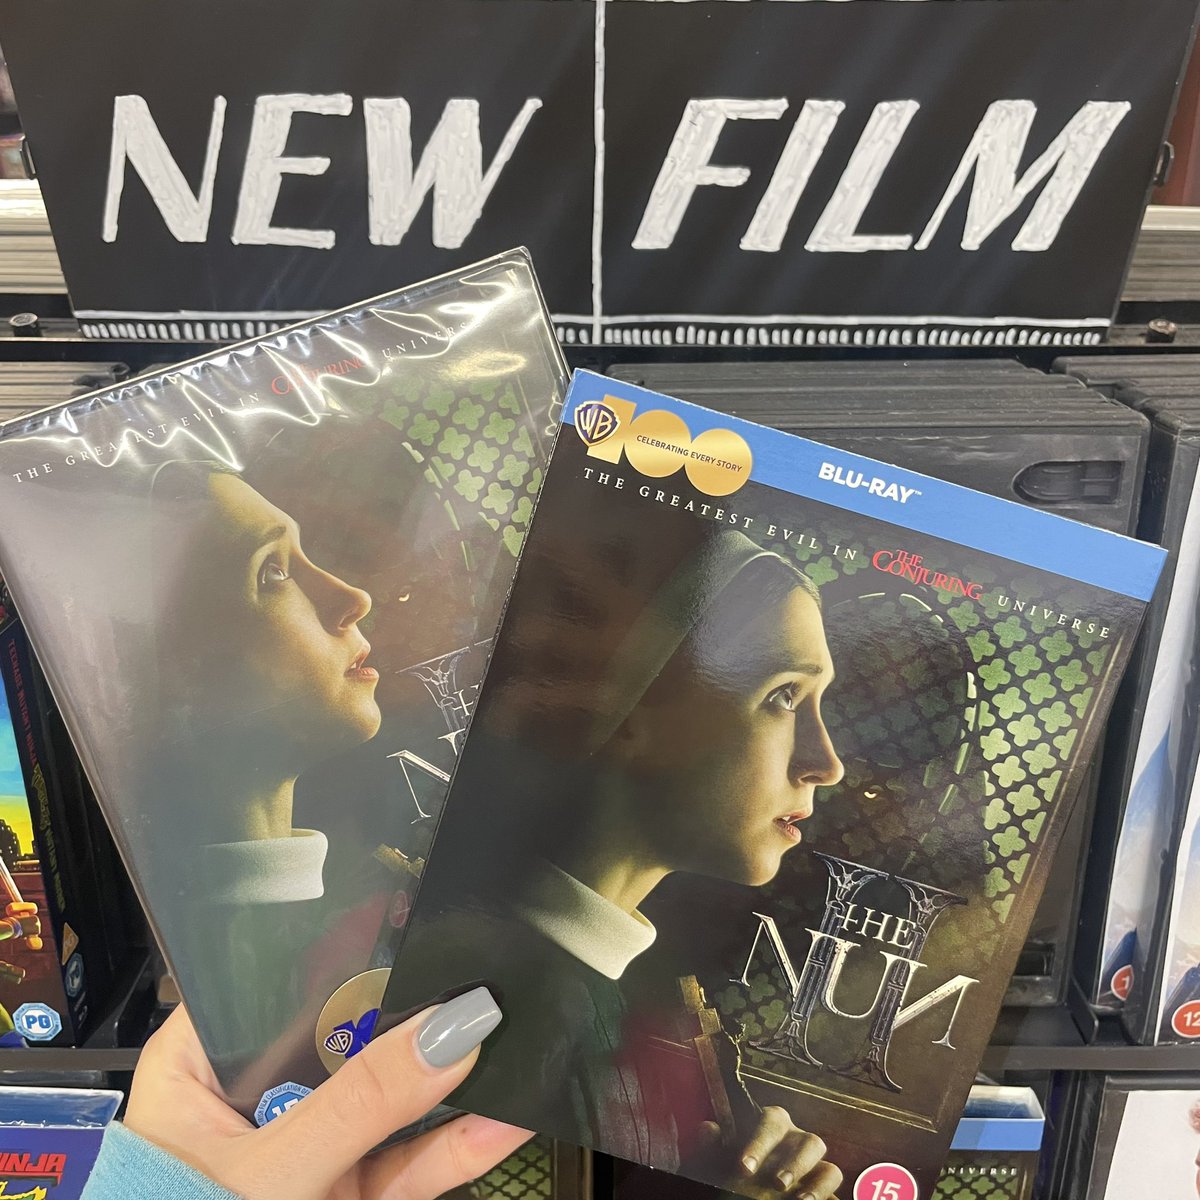 NEW RELEASE! ✨ It’s Monday and there are some amazing titles out TODAY! ❤️ #ncis #thenun2 #teenagemutantninjaturtles #newrelease #hmv #hmvluton @hmvtweets